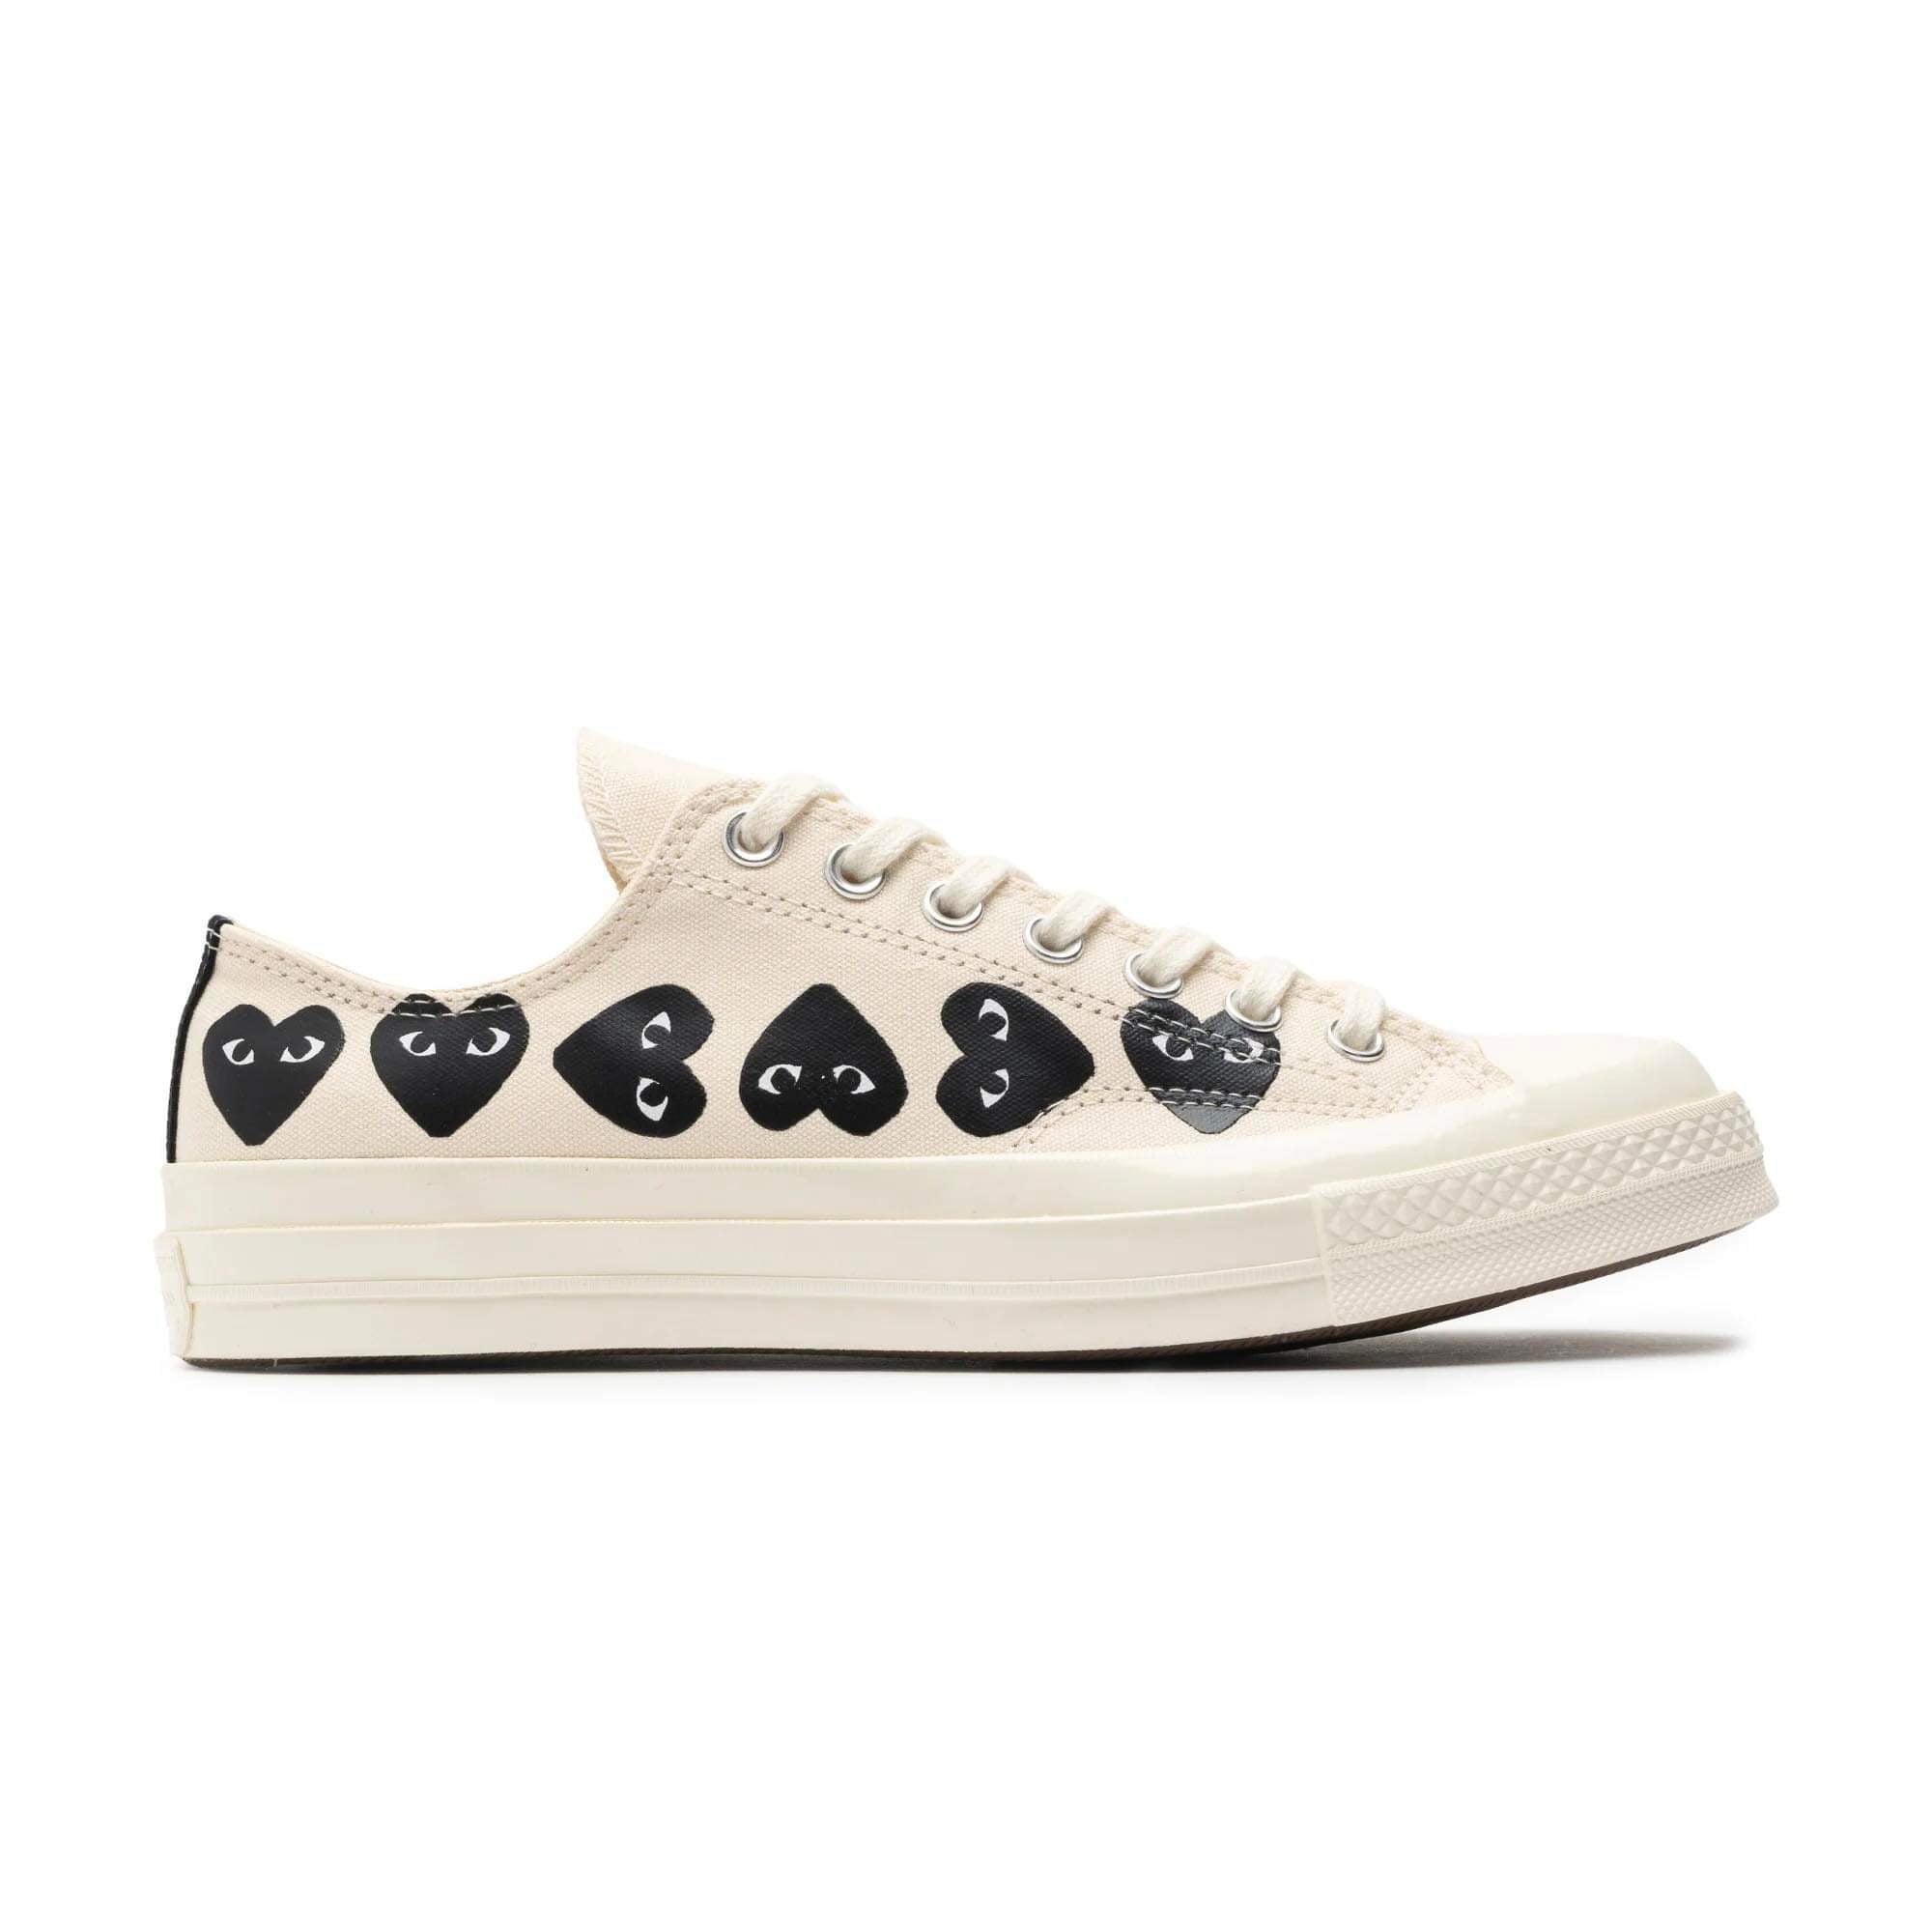 Converse Chuck Taylor All Star 70 Ox Comme des Garcons Play Multi